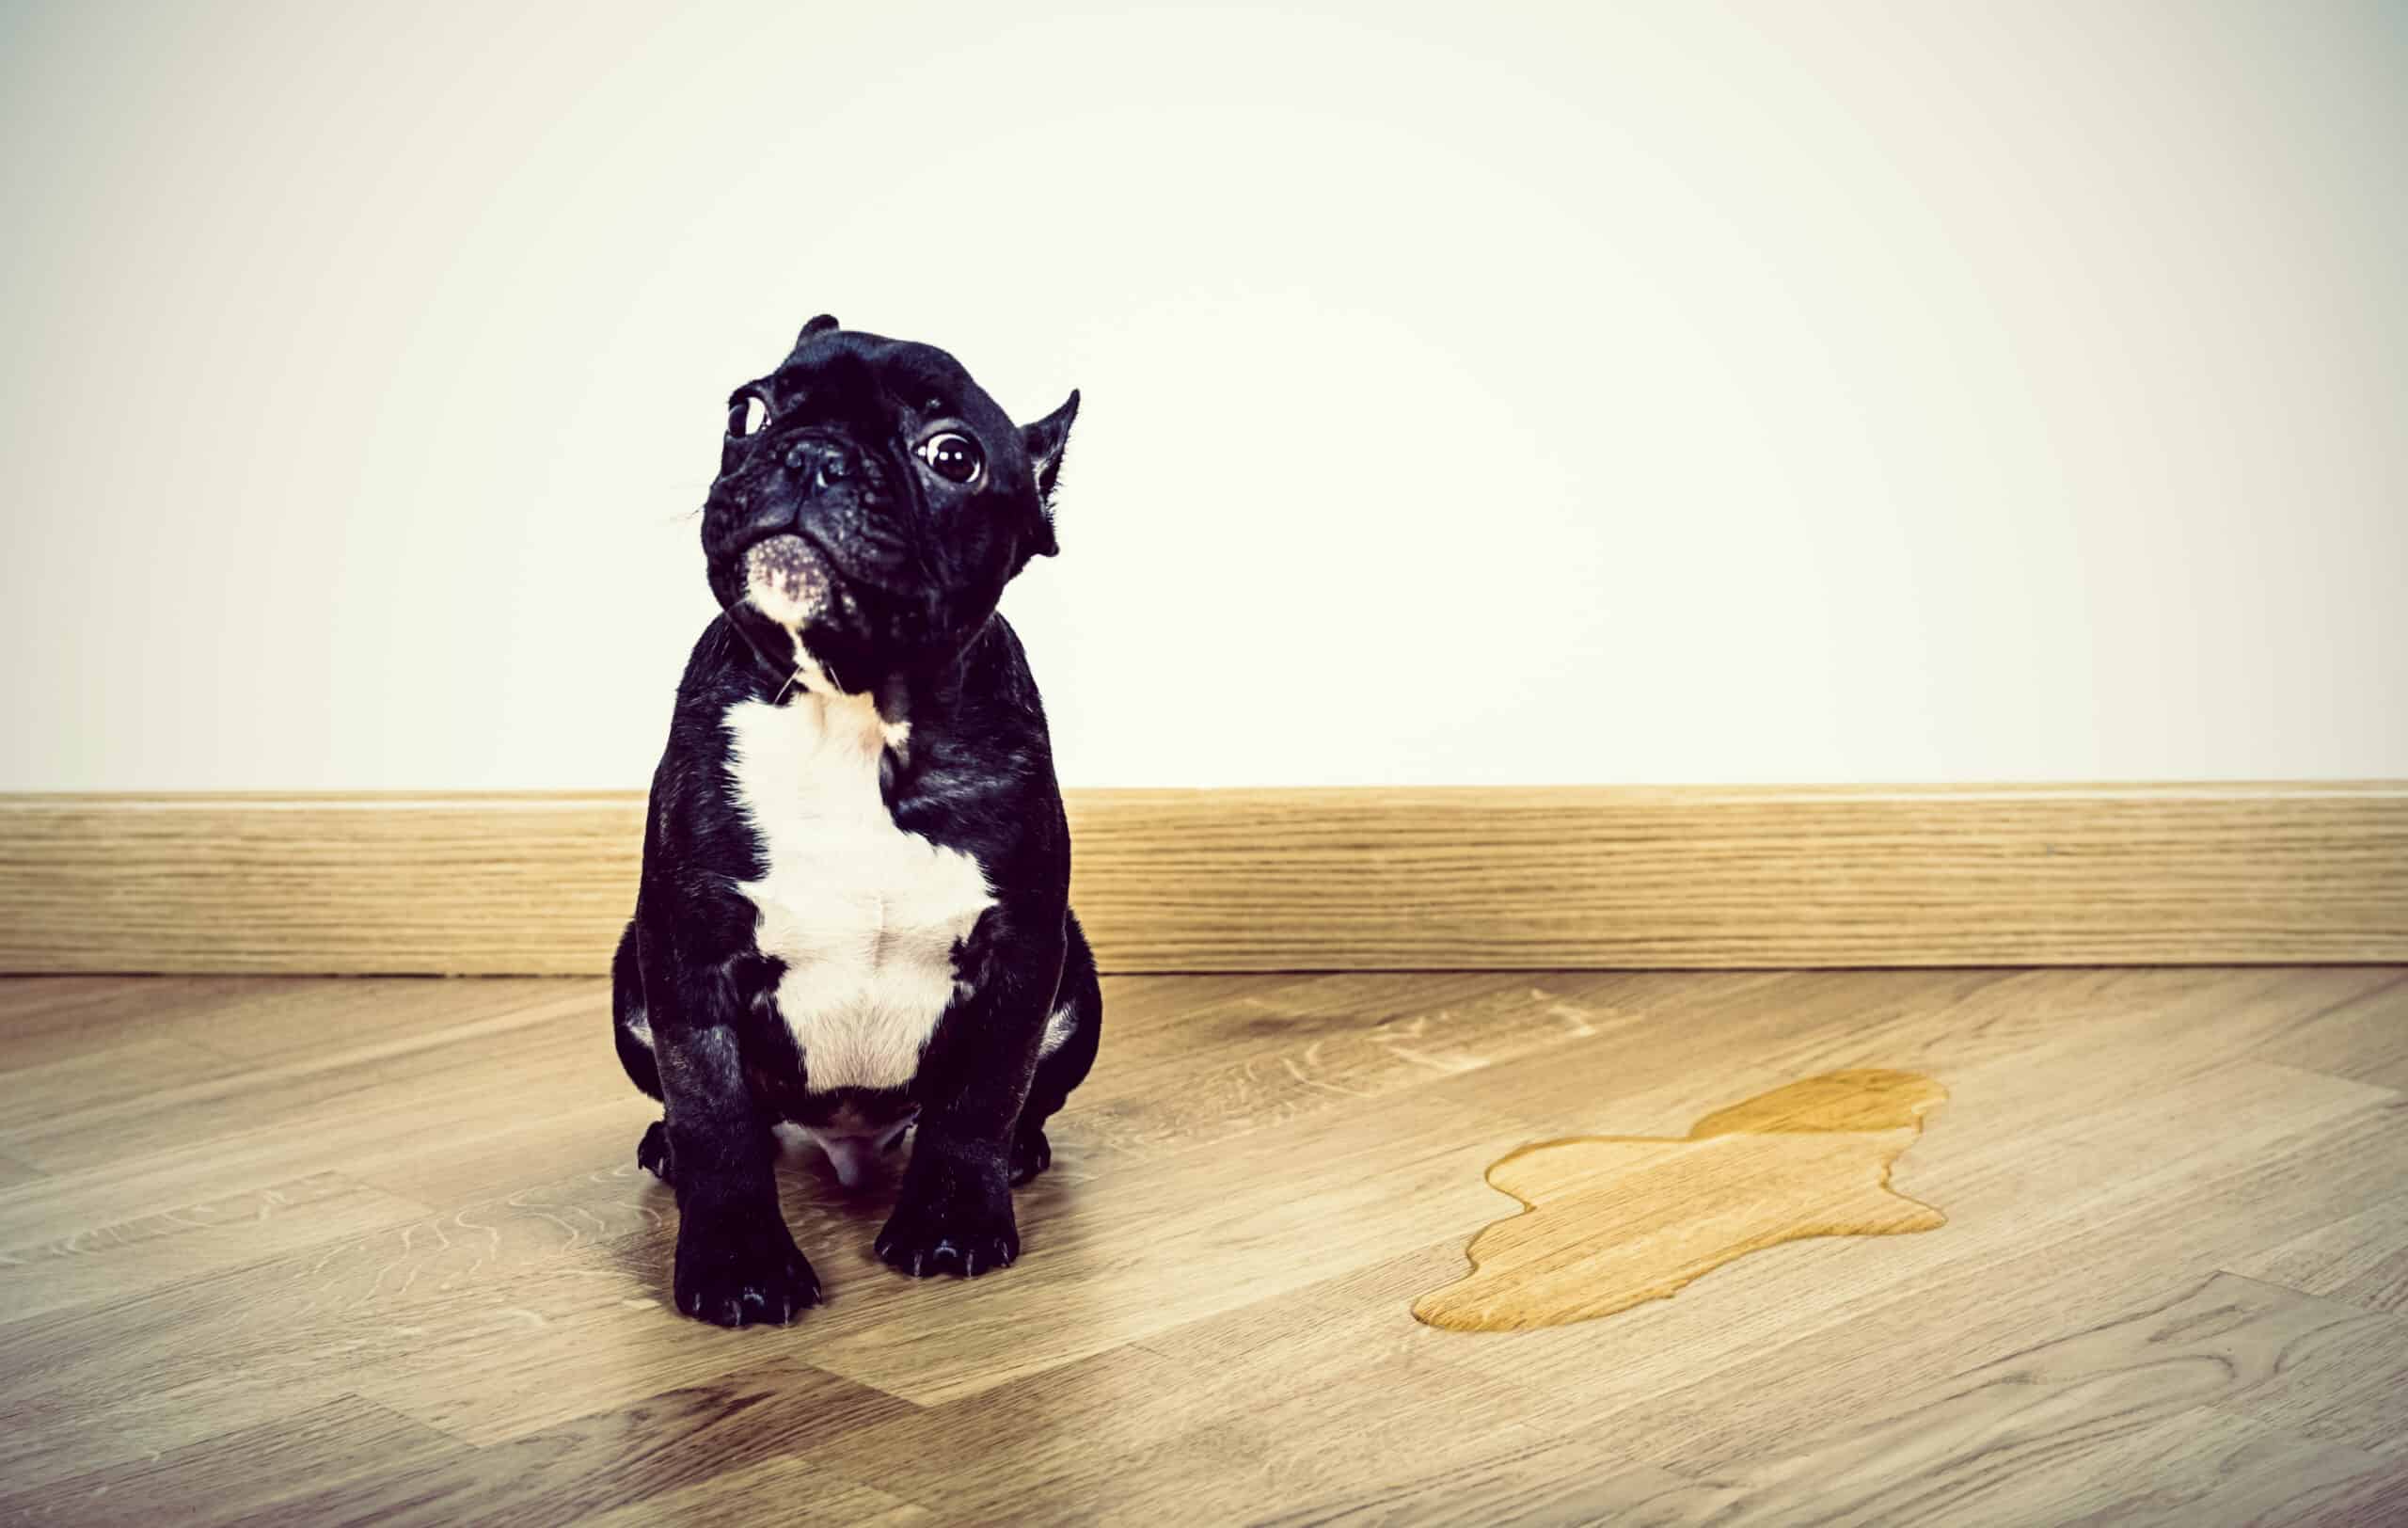 Bloat in Dogs: What Every Dog Owner Should Know